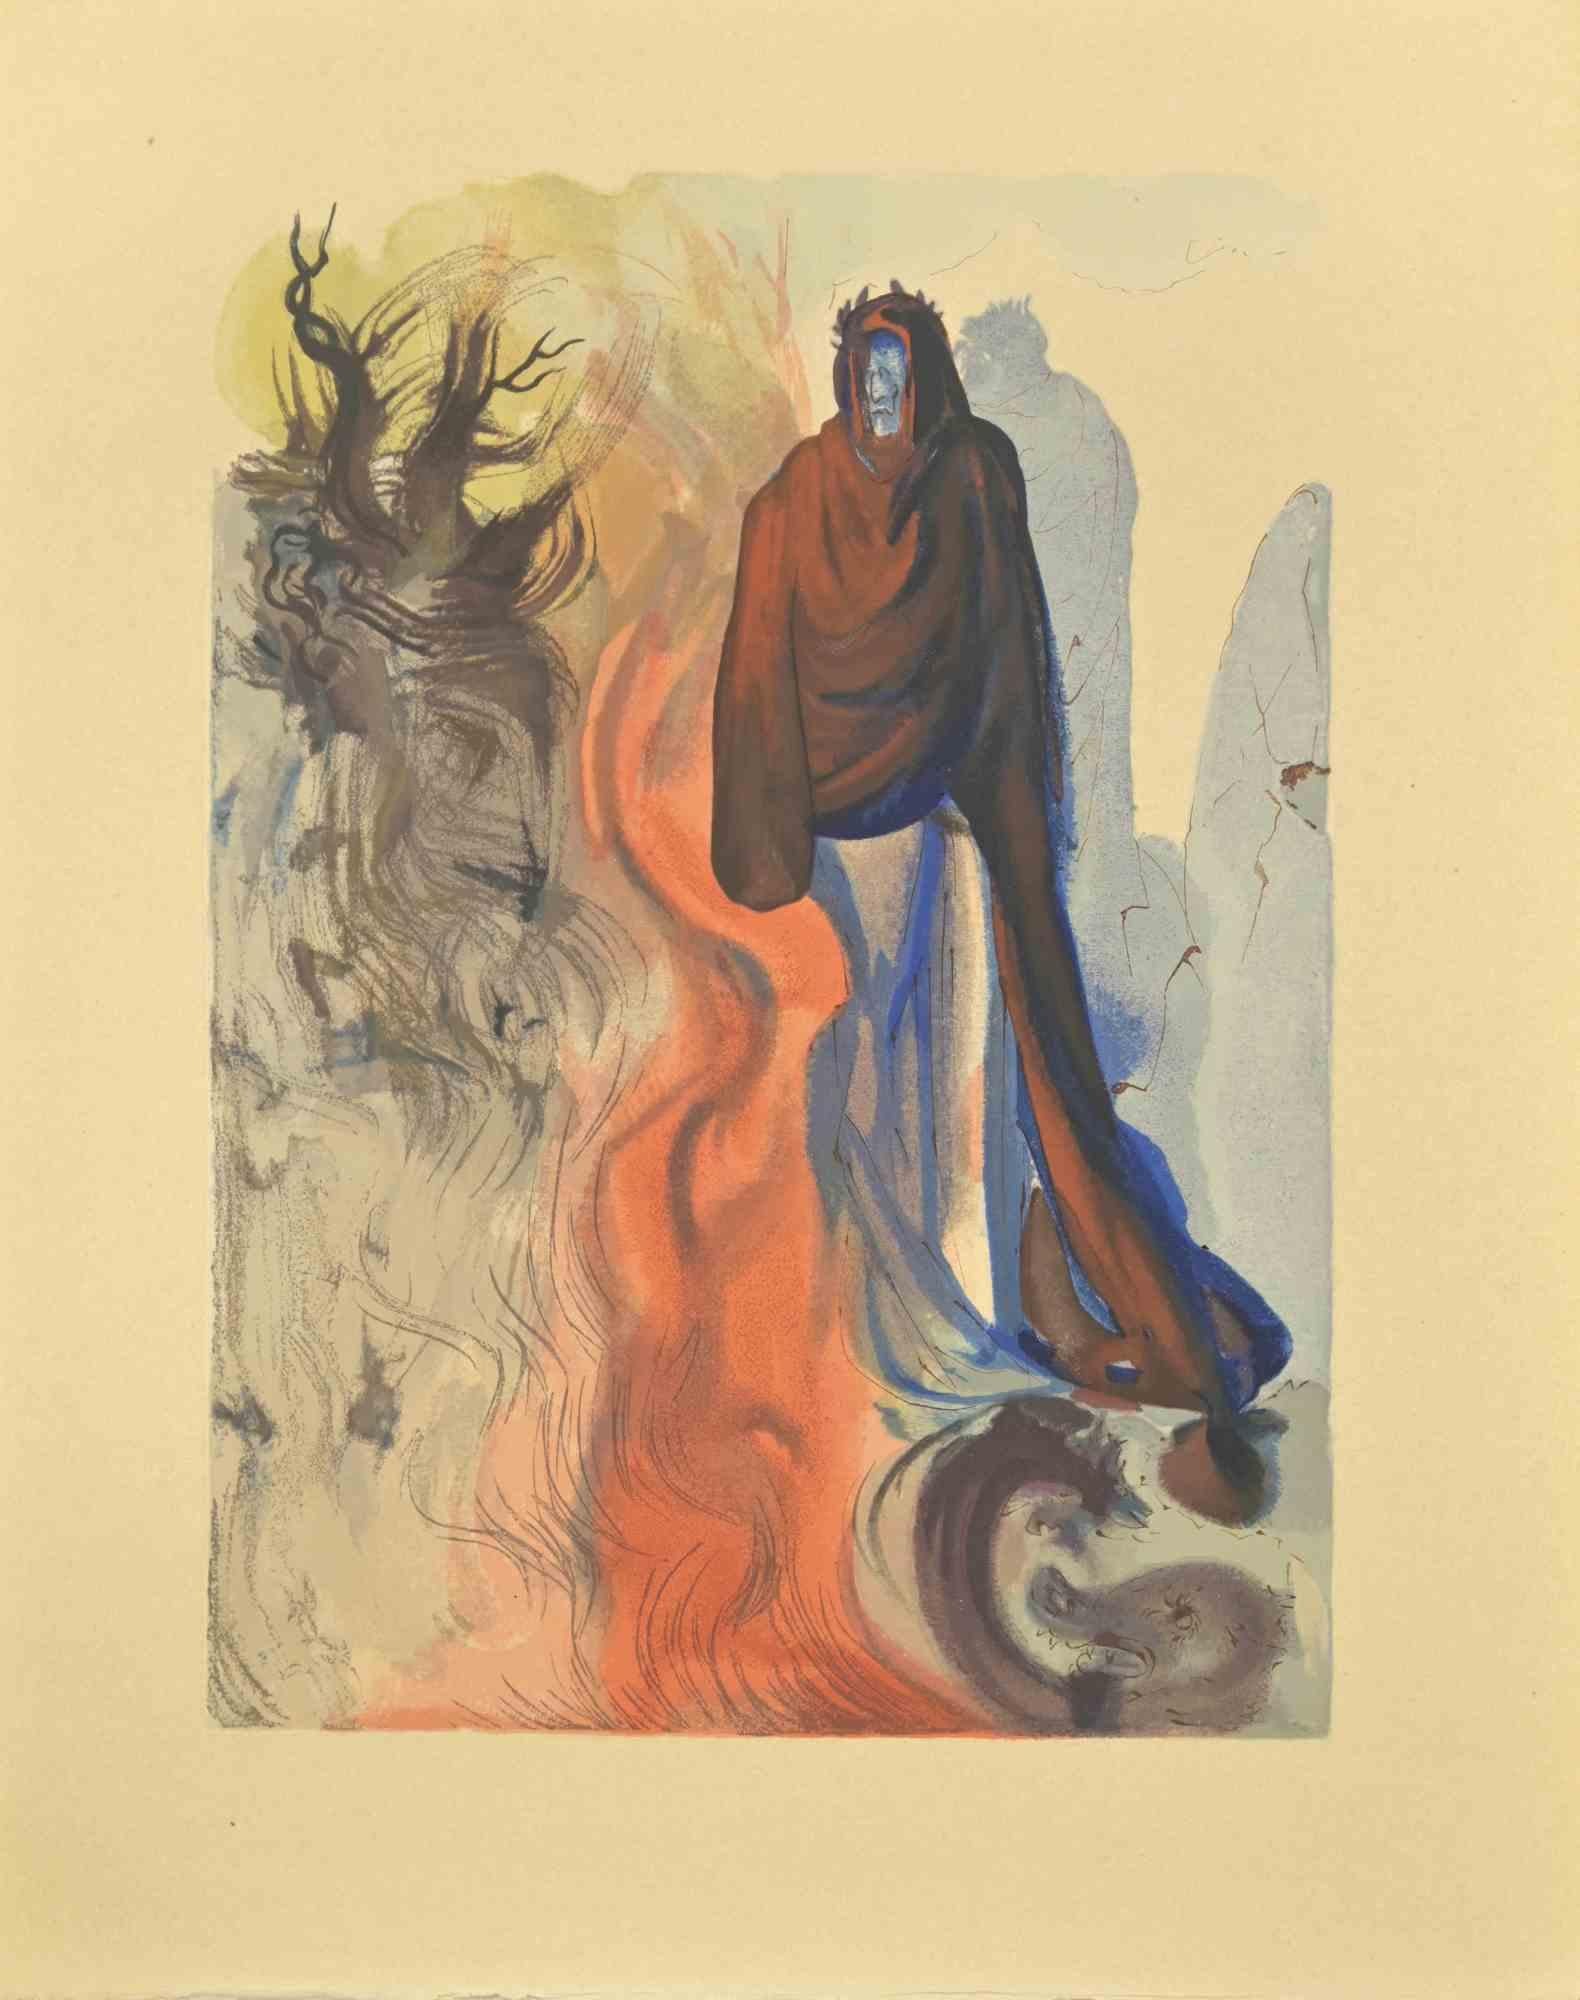 Salvador Dalí Figurative Print - Stairway to Heaven - Woodcut  - 1963